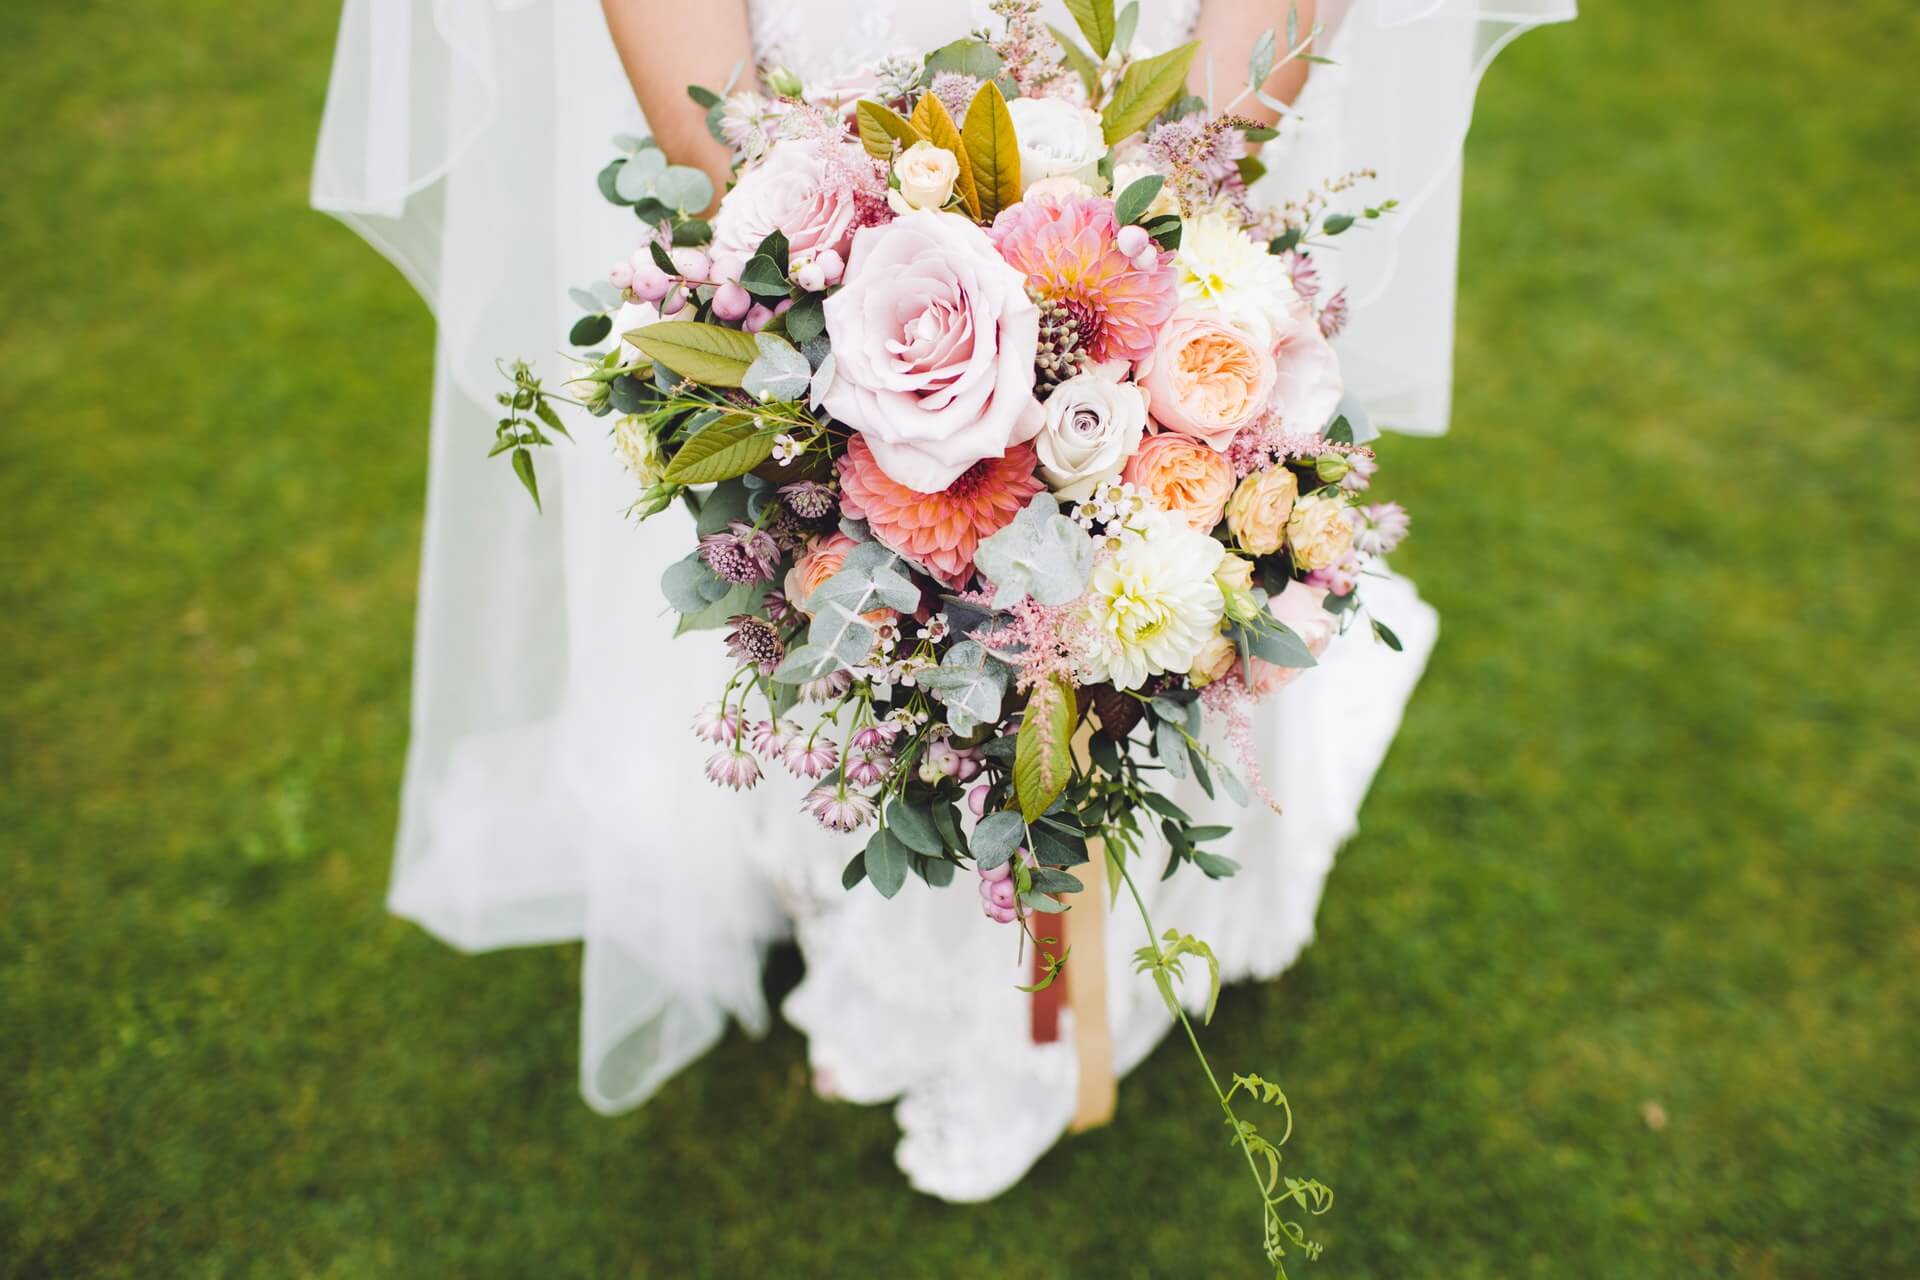 10 Of The Most Popular Flowers For Weddings - Popular Wedding Flowers